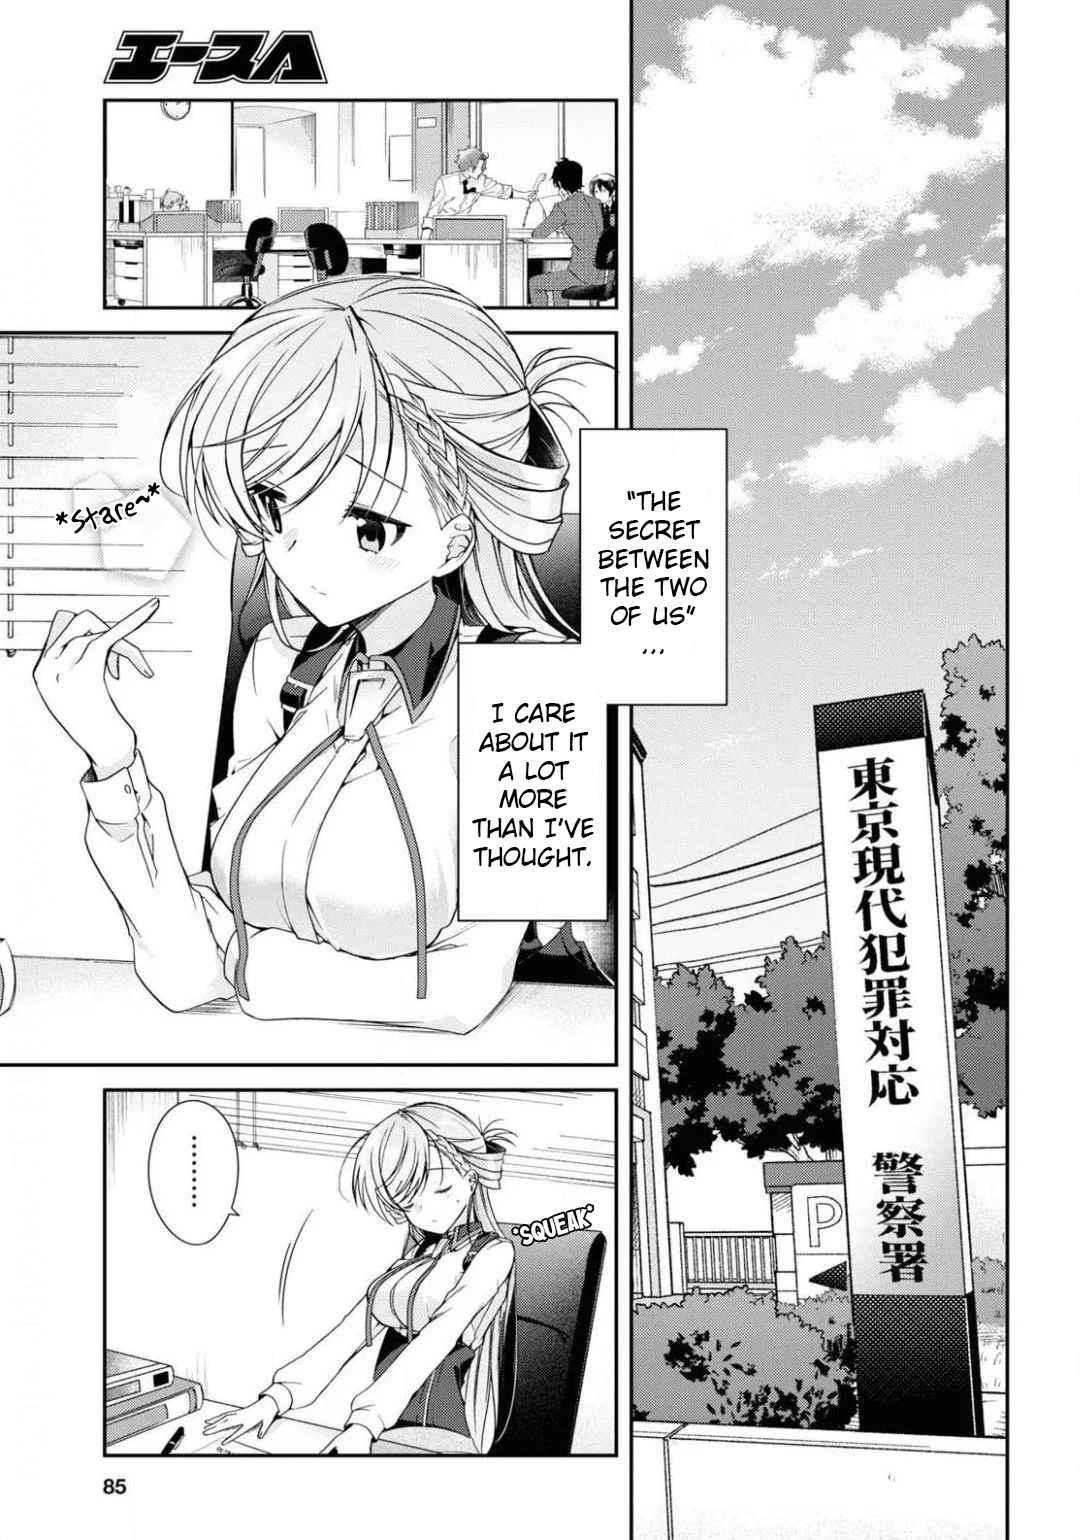 Isshiki-san Wants to Know About Love. - chapter 4 - #5